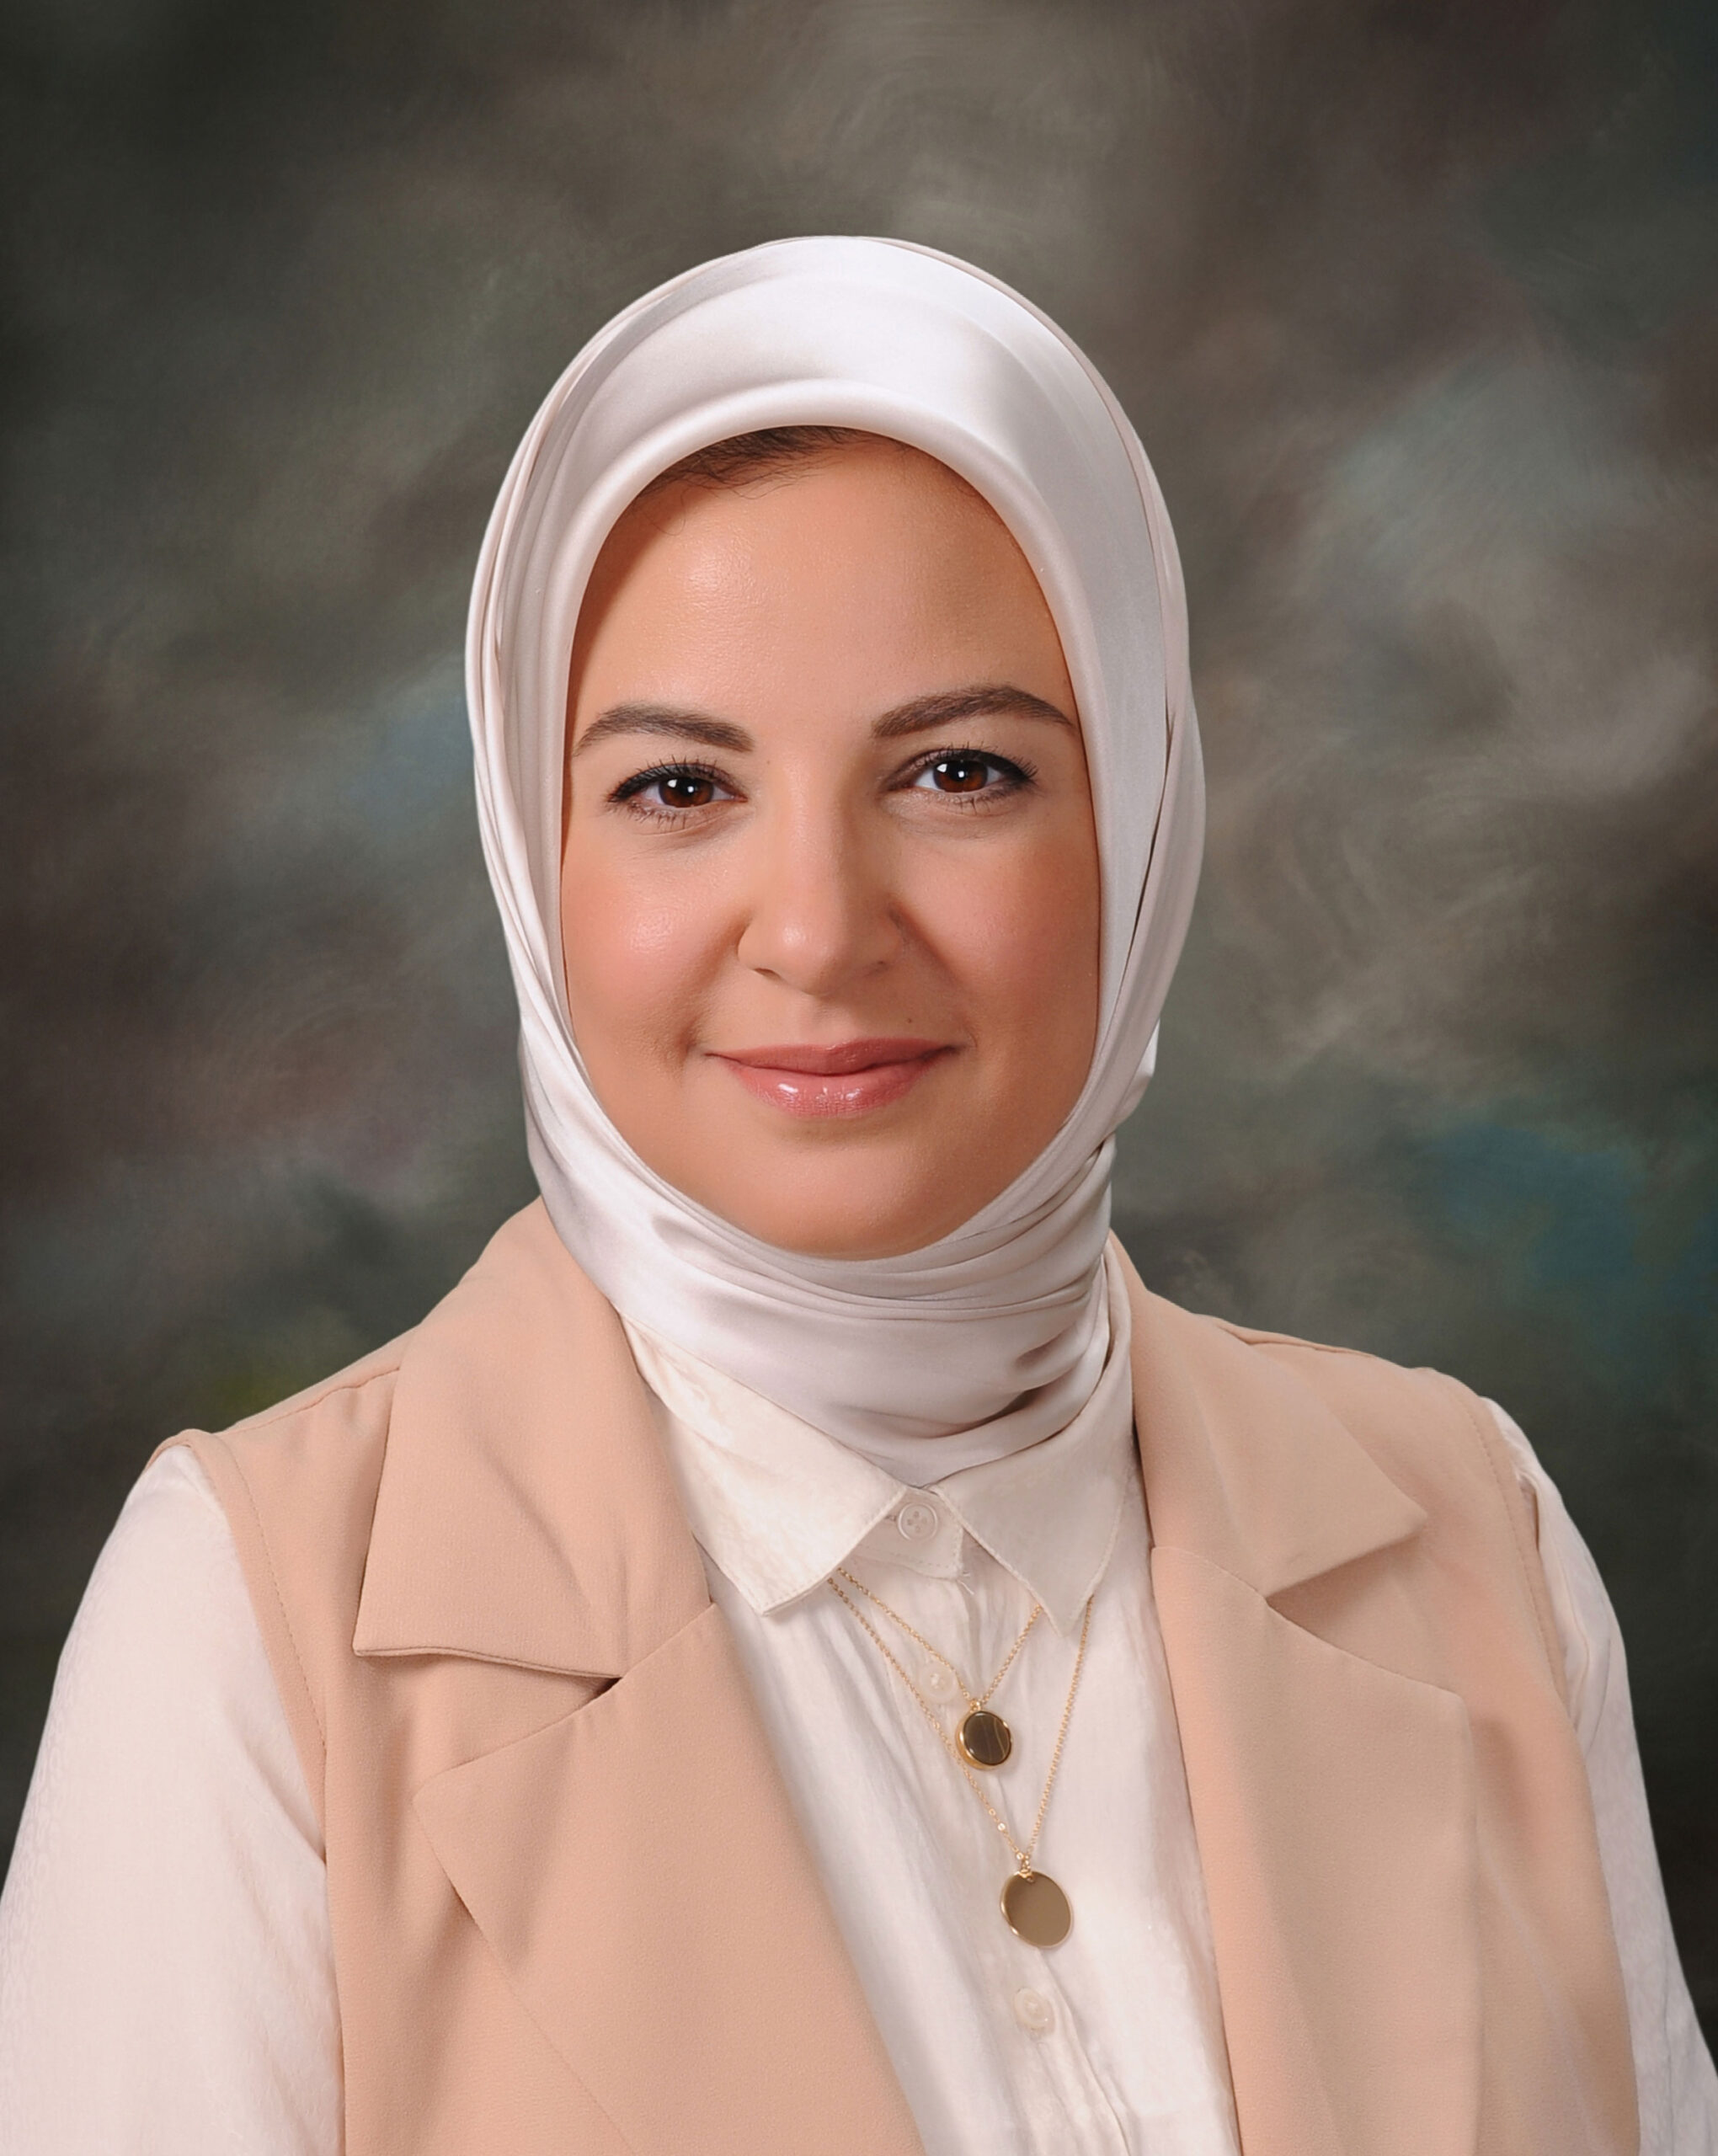 Dr. Abdelwahab Family Practice